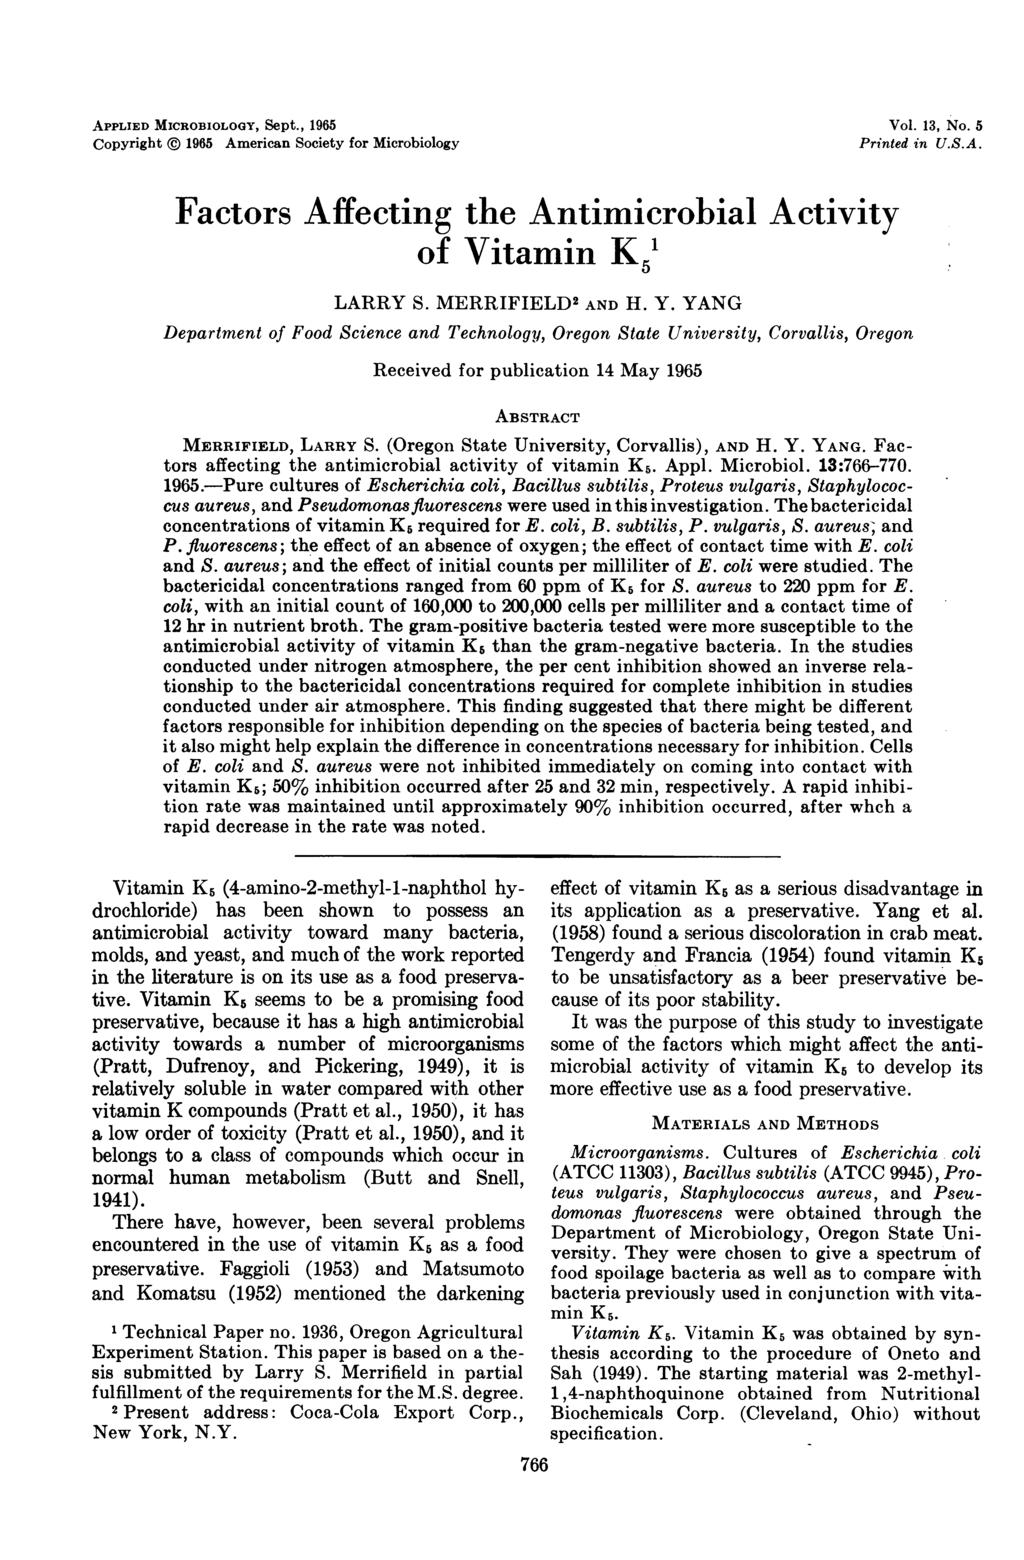 APPLIED MICROBIOLOGY, Sept., 1965 Copyright @ 1965 American Society for Microbiology Vol. 13, No. 5 Printed in U.S.A. Factors Affecting the Antimicrobial Activity of Vitamin K LARRY S.